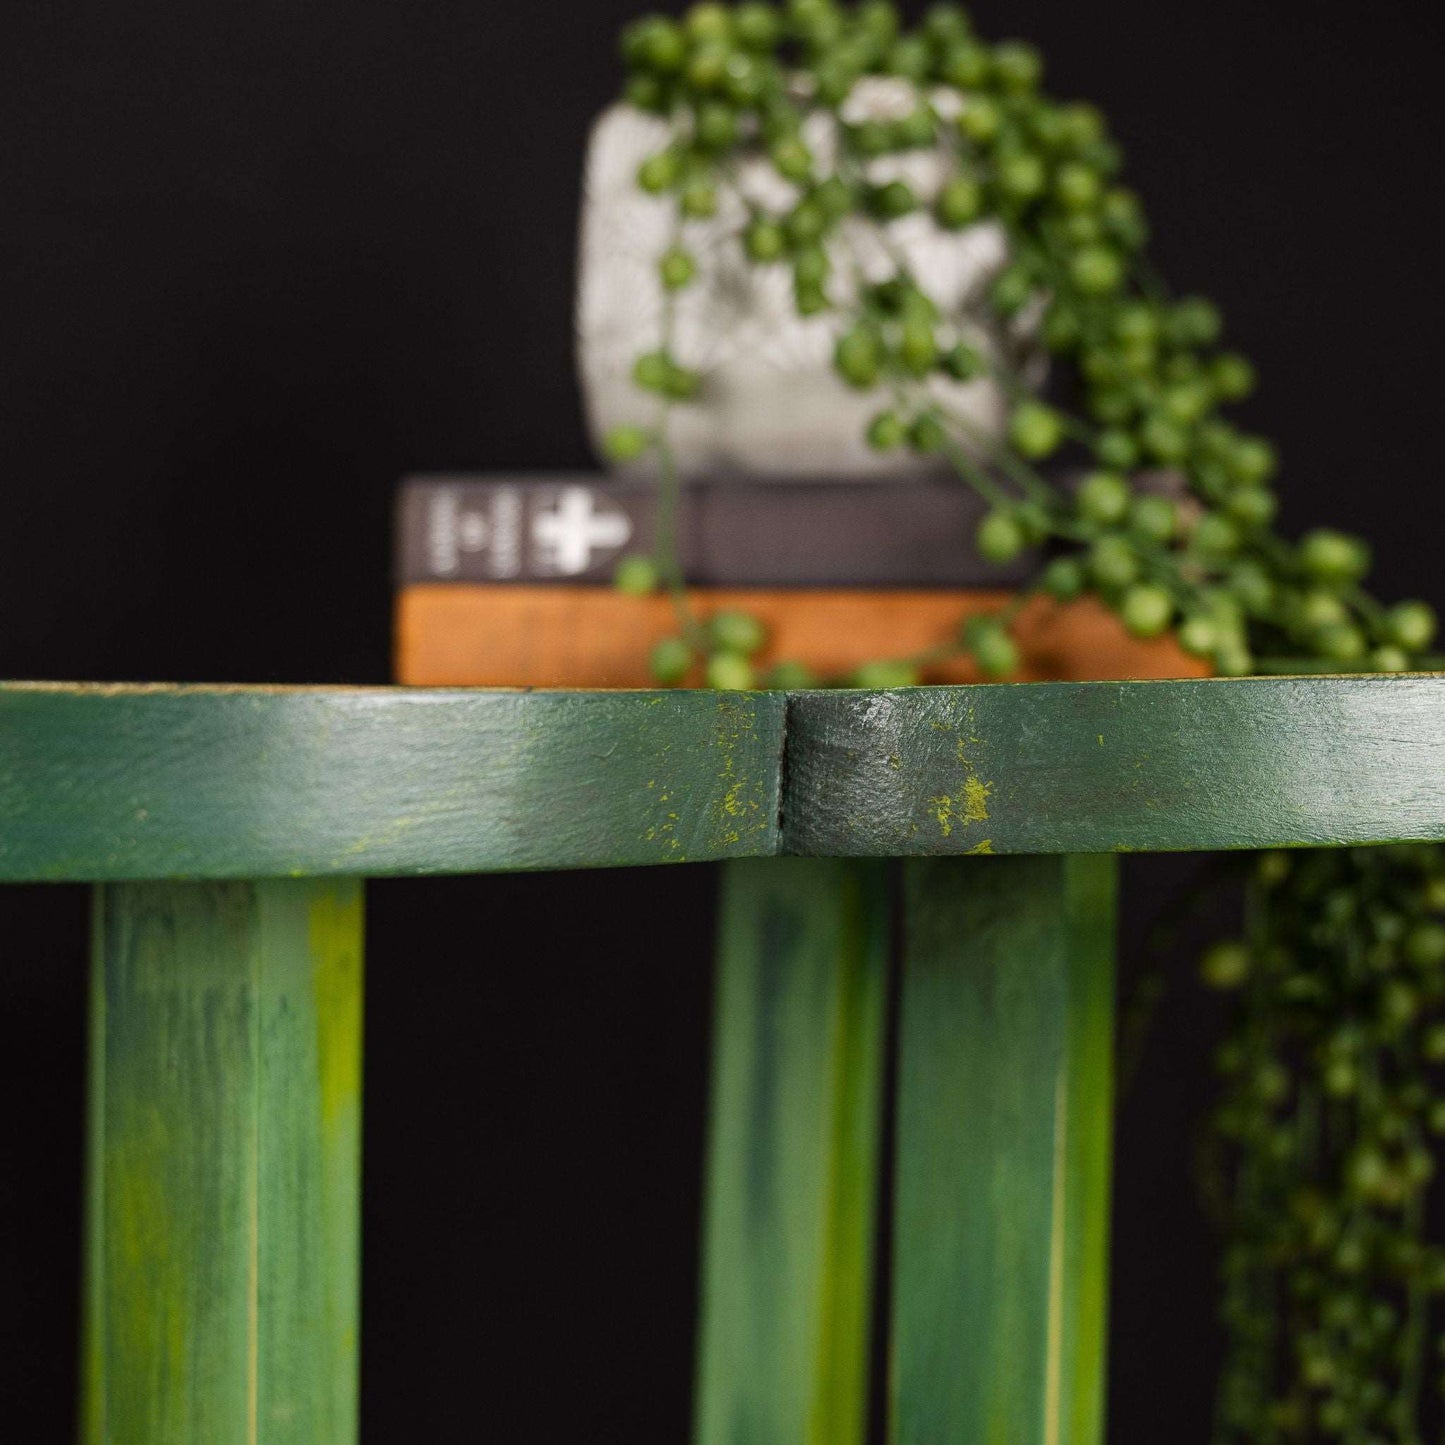 Rustic Green Plant Table Side Table